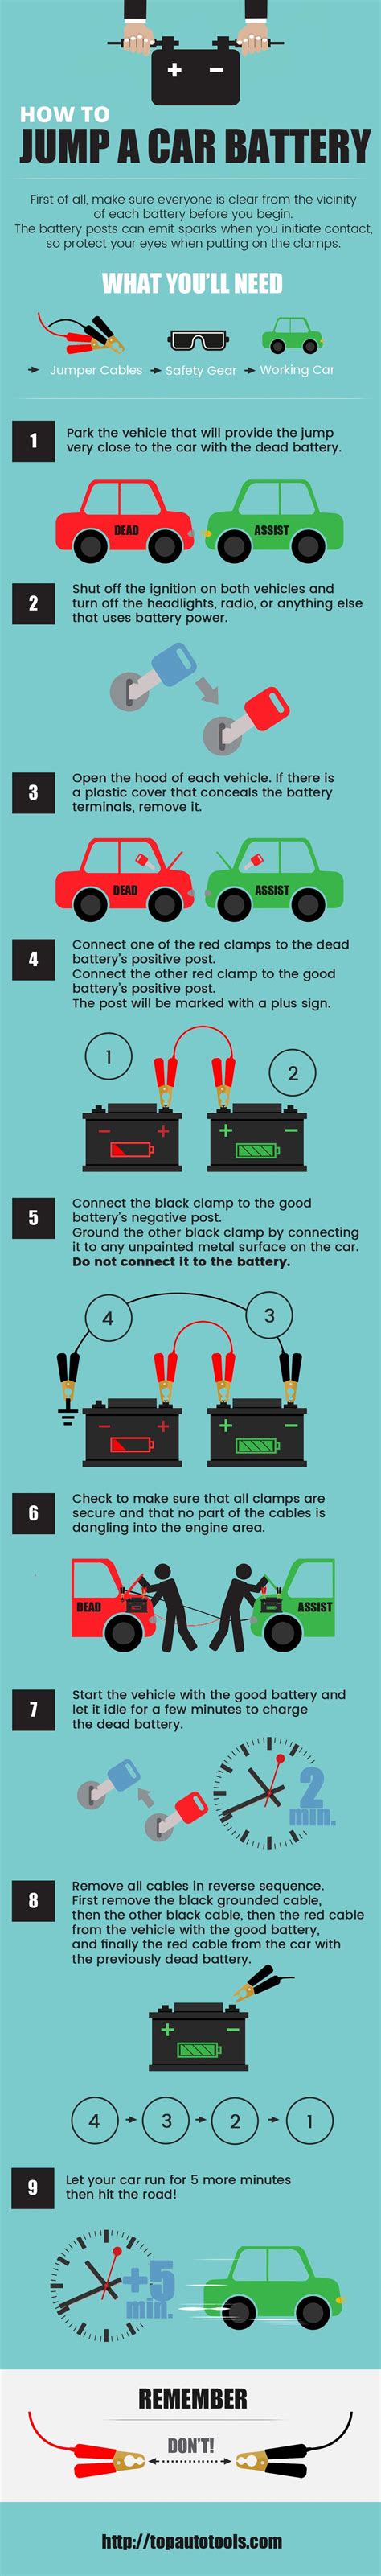 How to jump a car with jump pack. Jump Starting a Car #Infographic - Visualistan